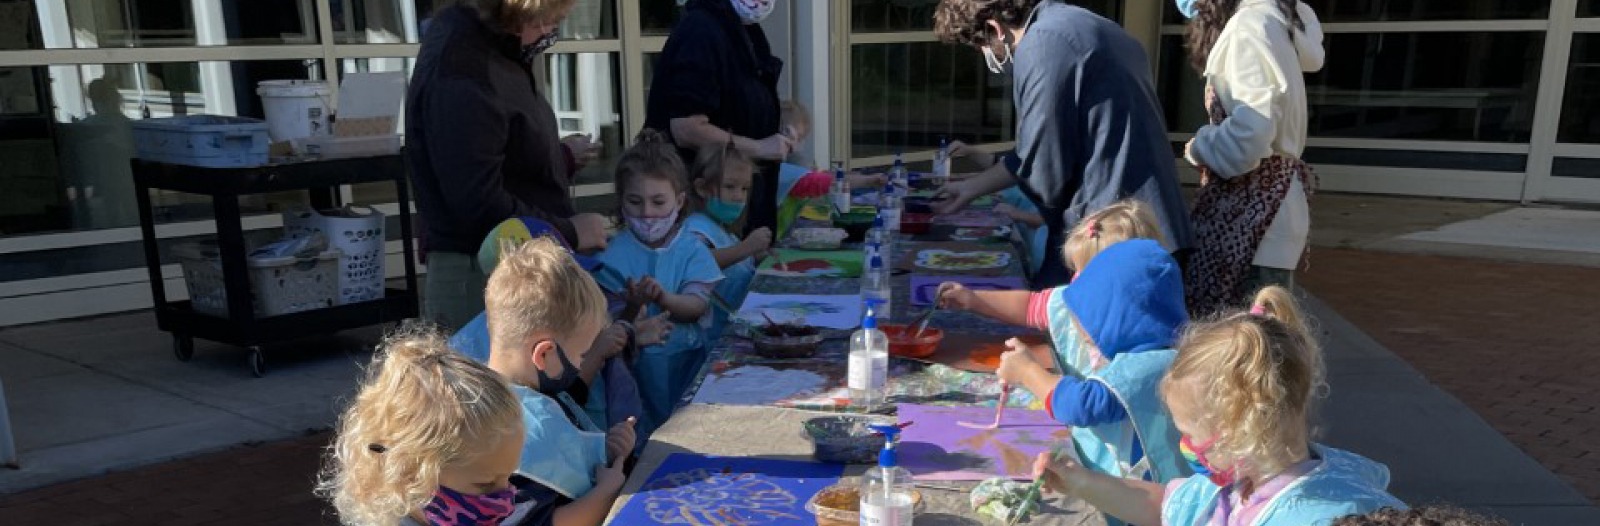 View of children painting at a long table